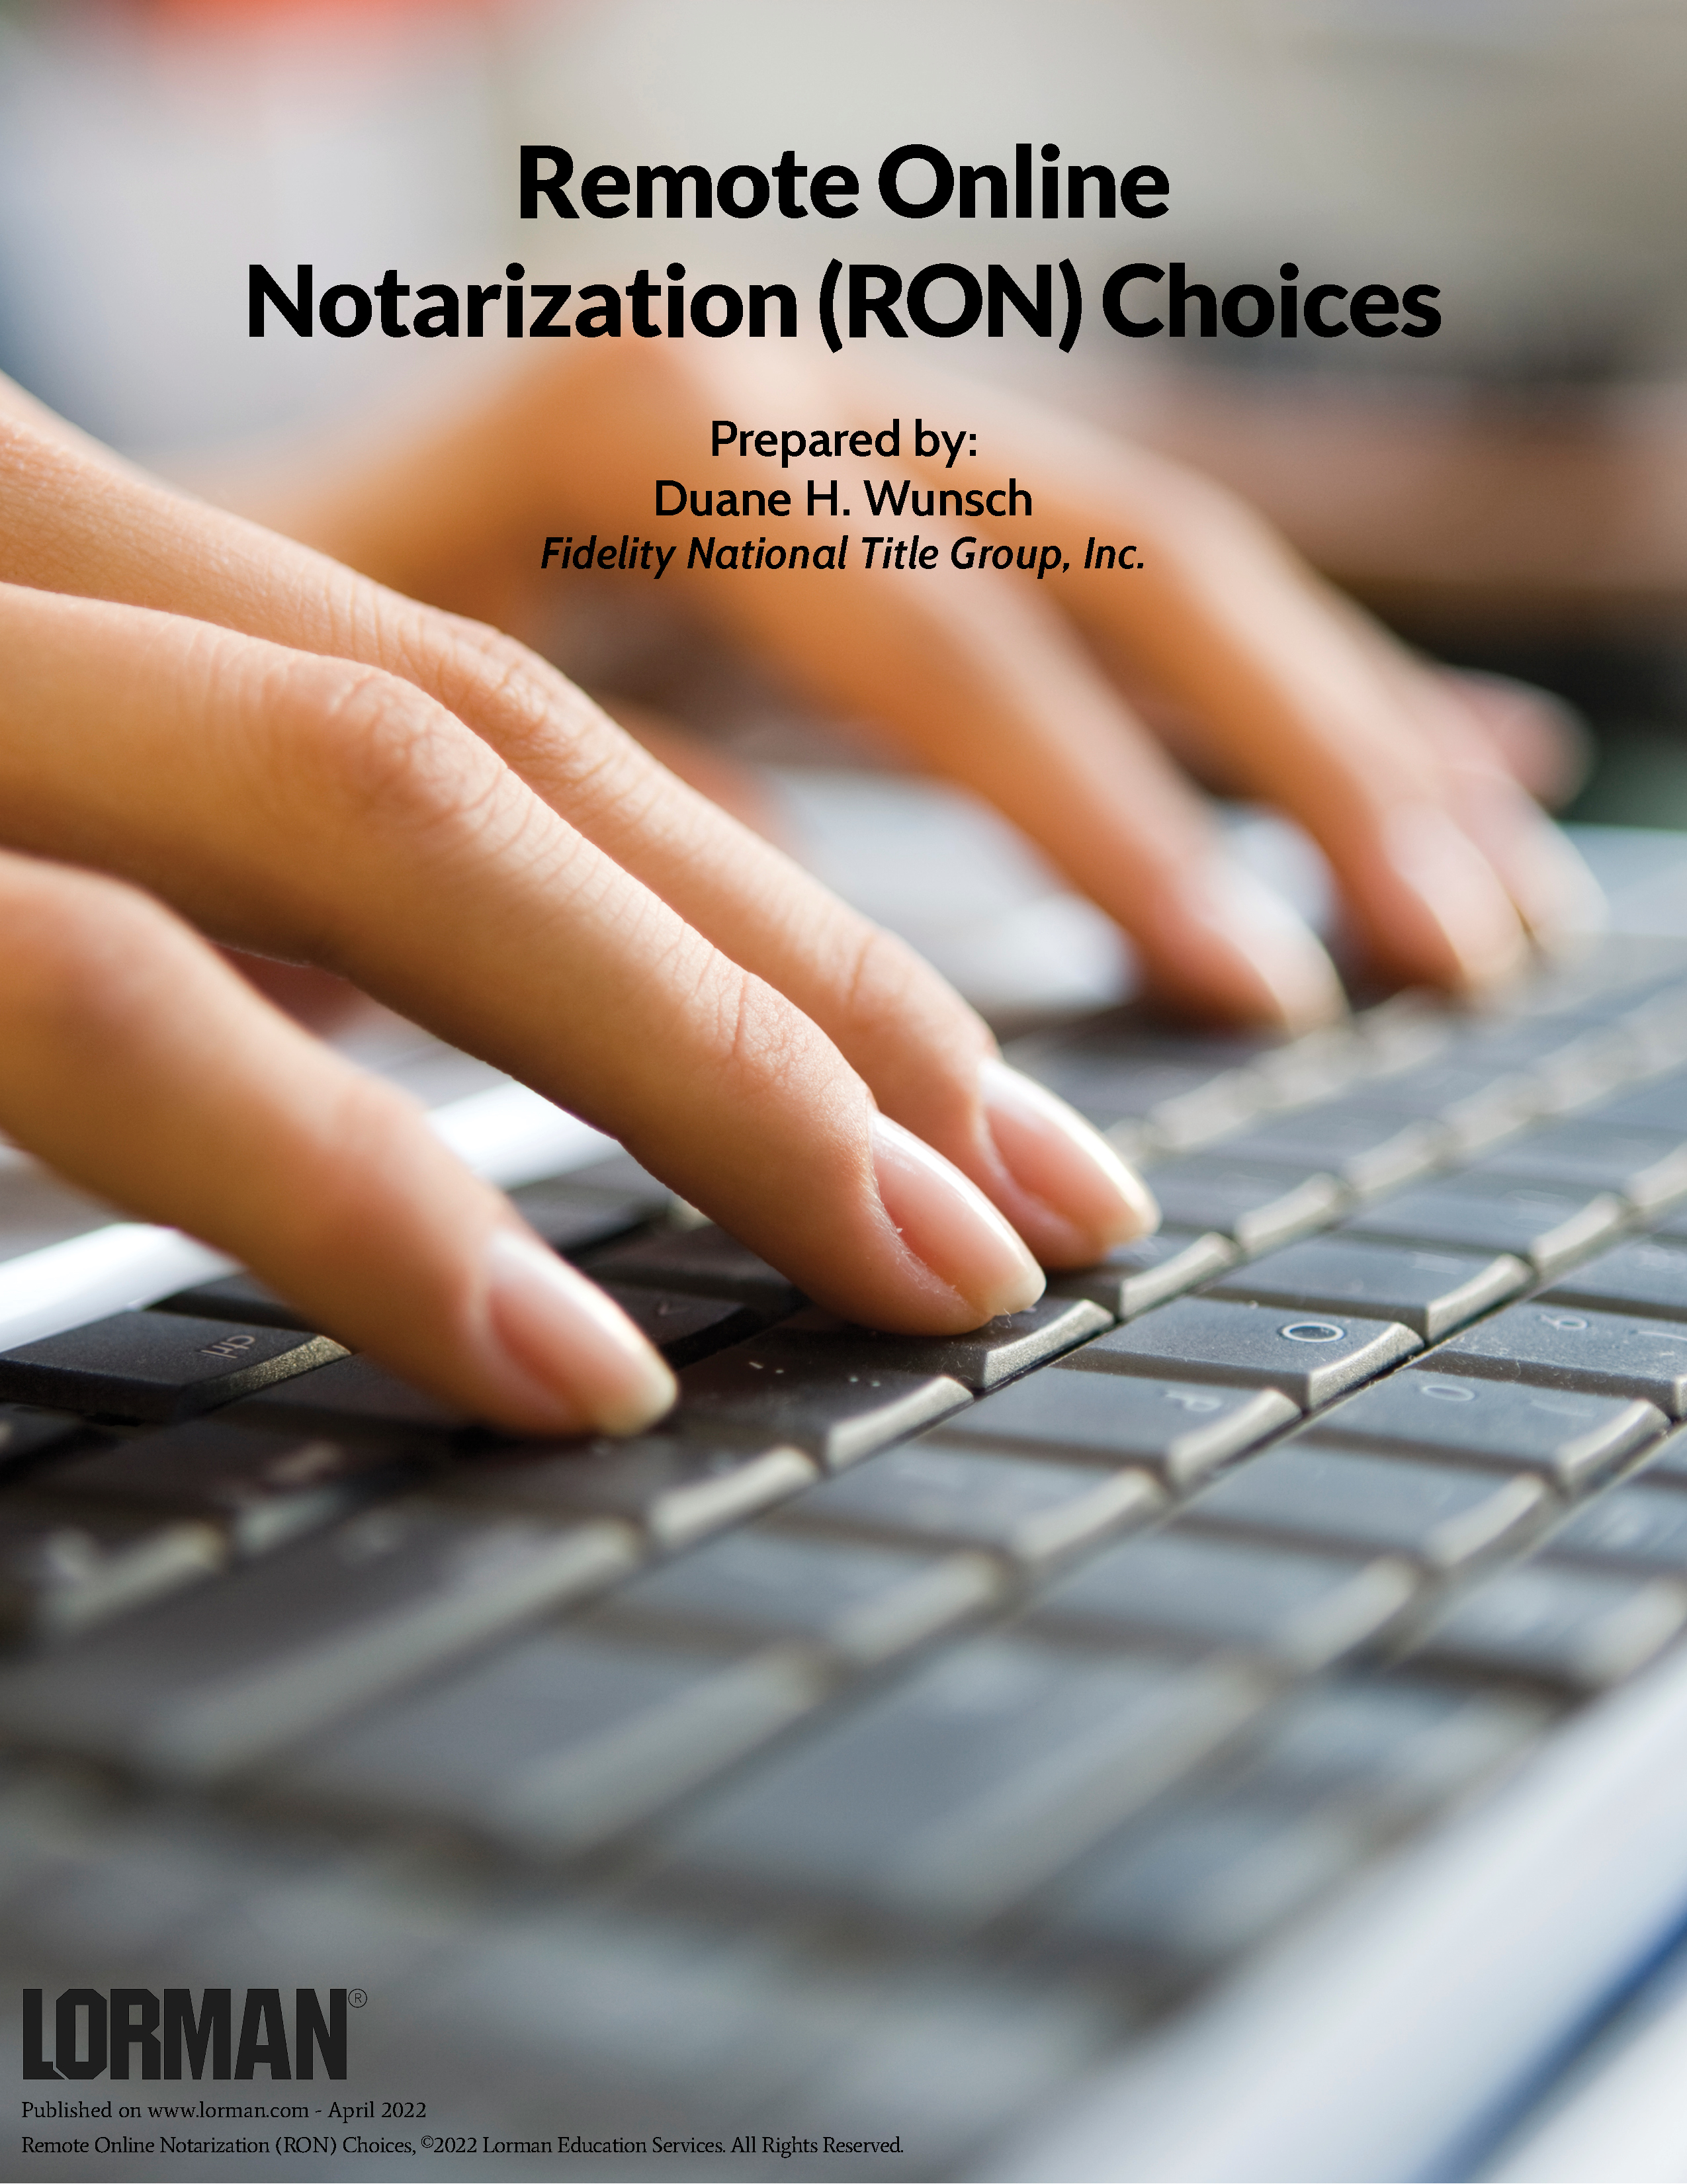 Remote Online Notarization (RON) Choices